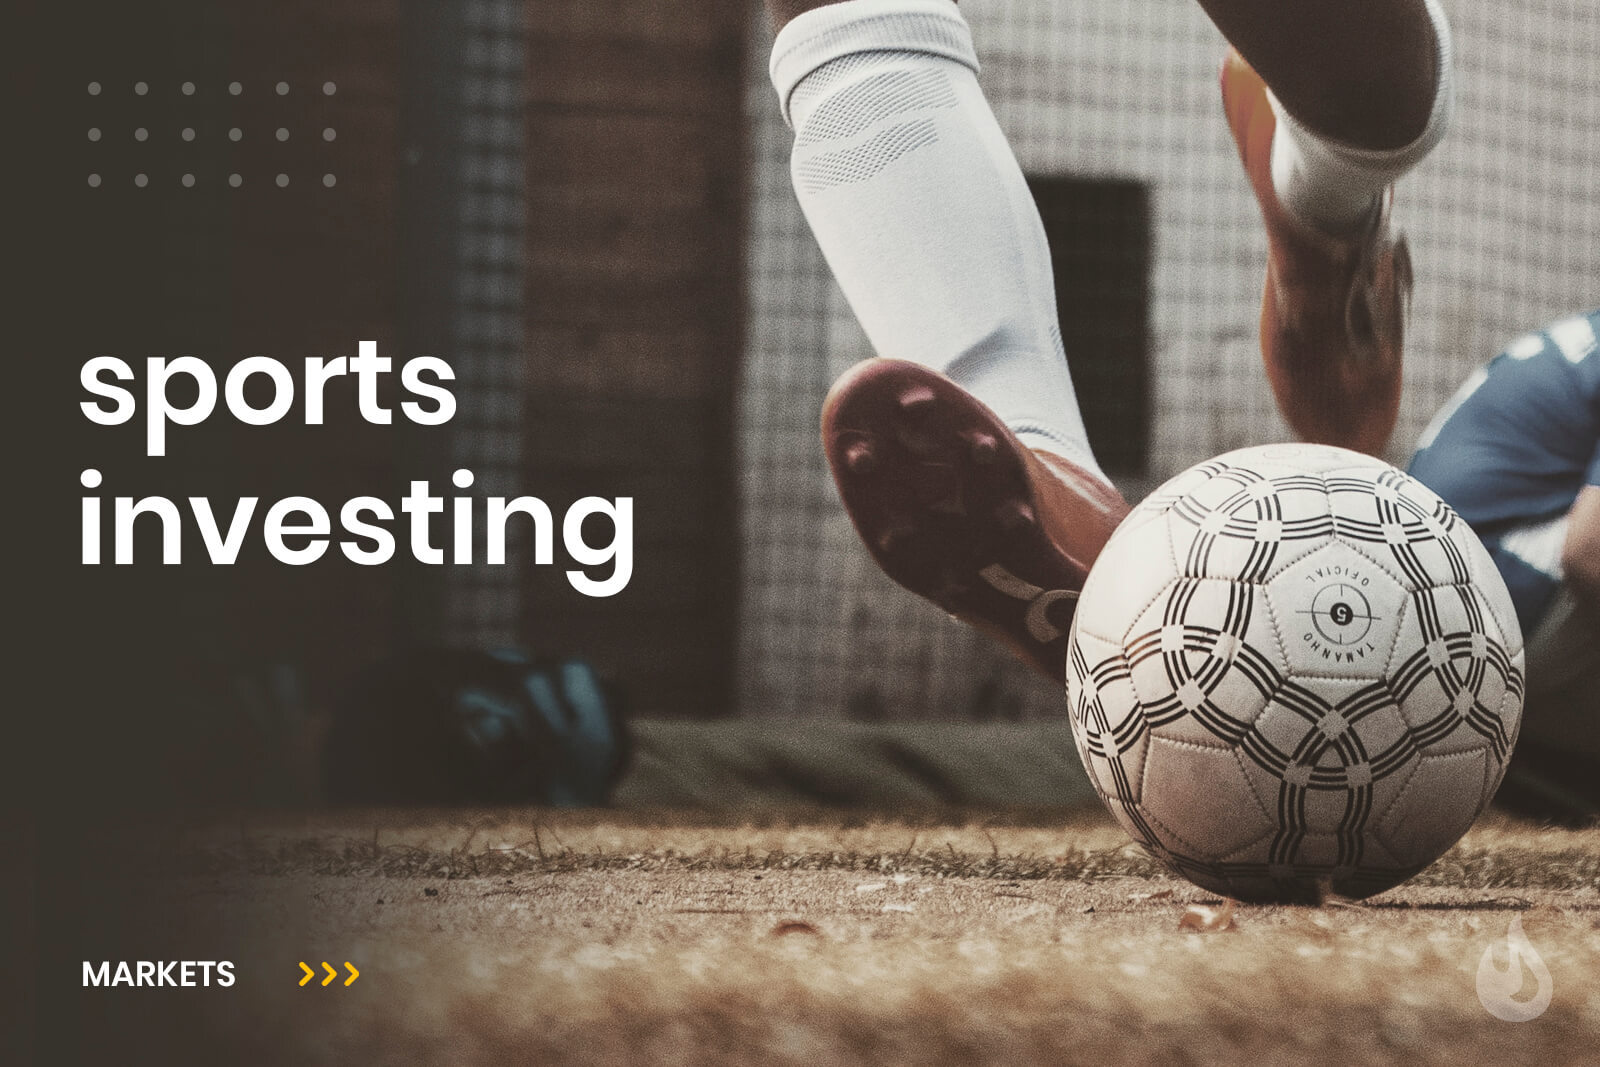 sport investing software free download